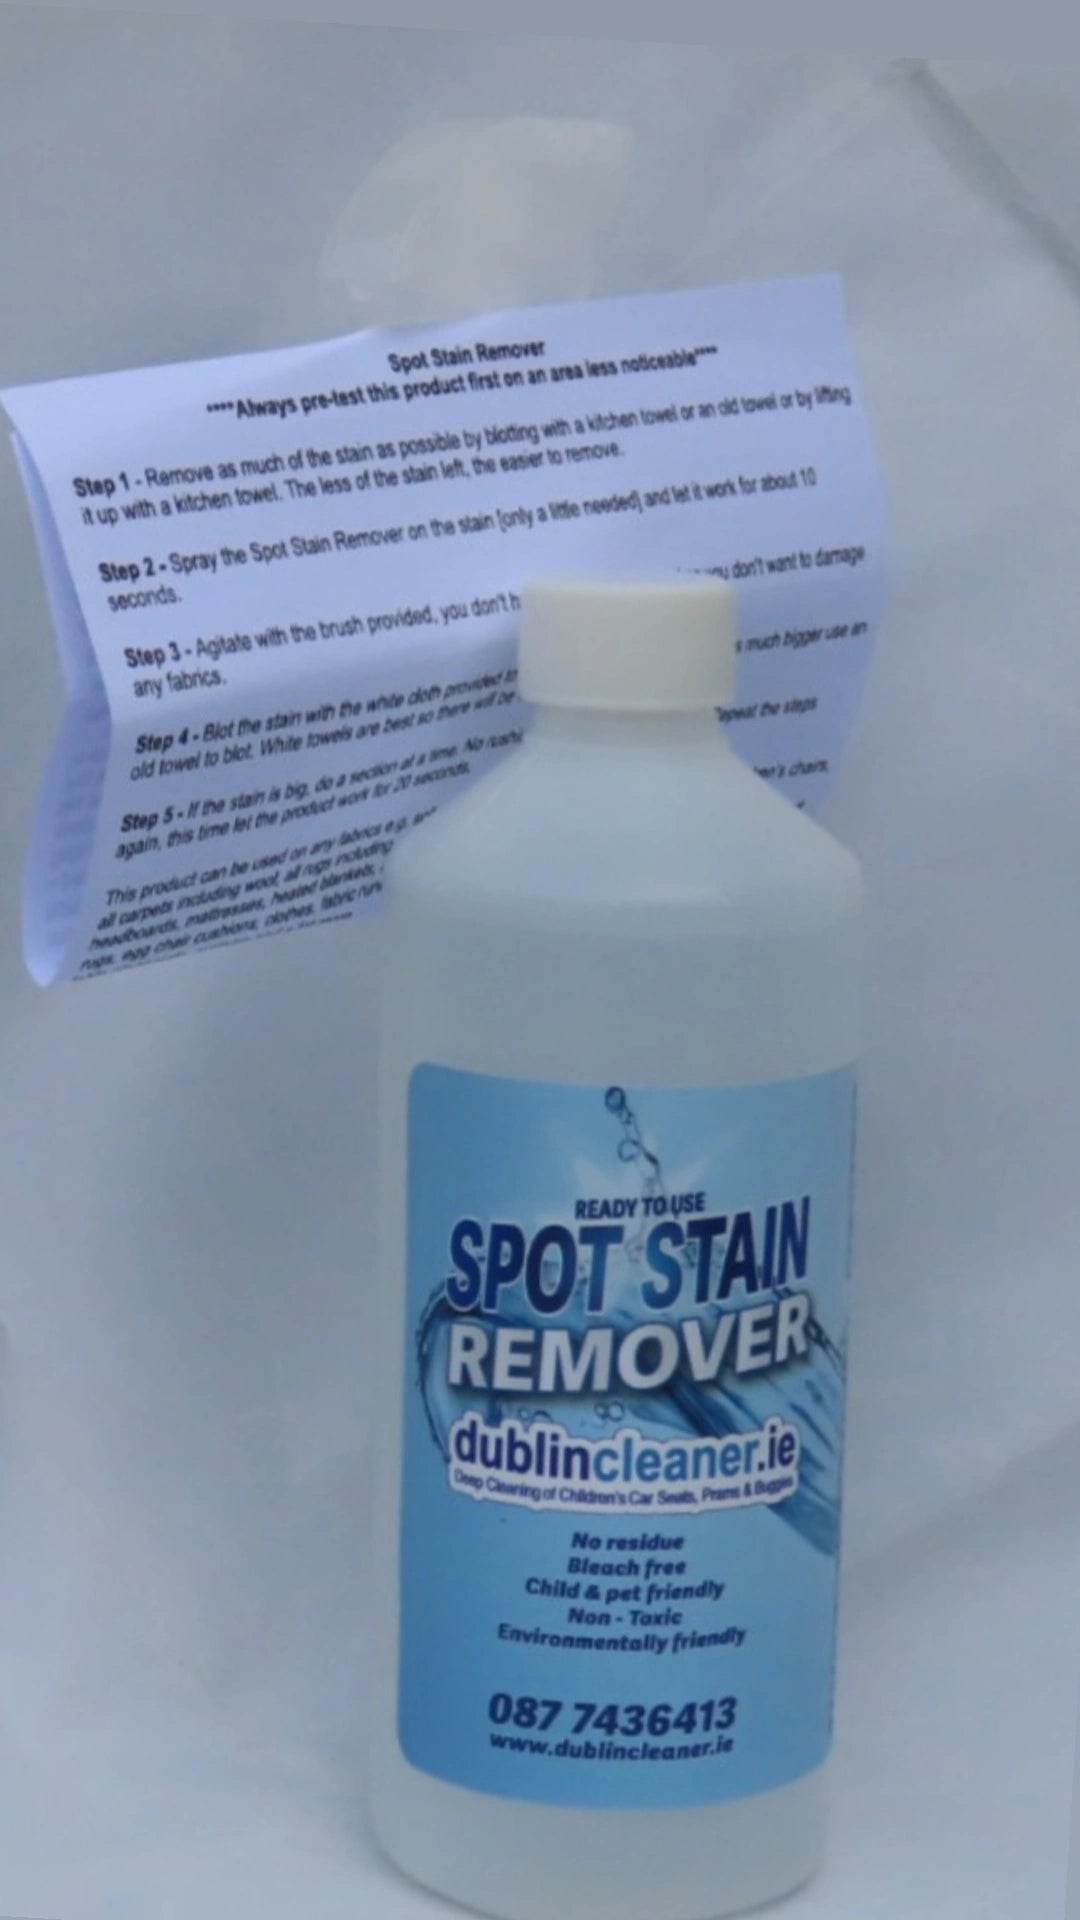 Resume packing 4th March -500ml Spot Stain Remover with Nozzle & instruction sheet or choose item with no Nozzle on the website & instruction if u don't need them